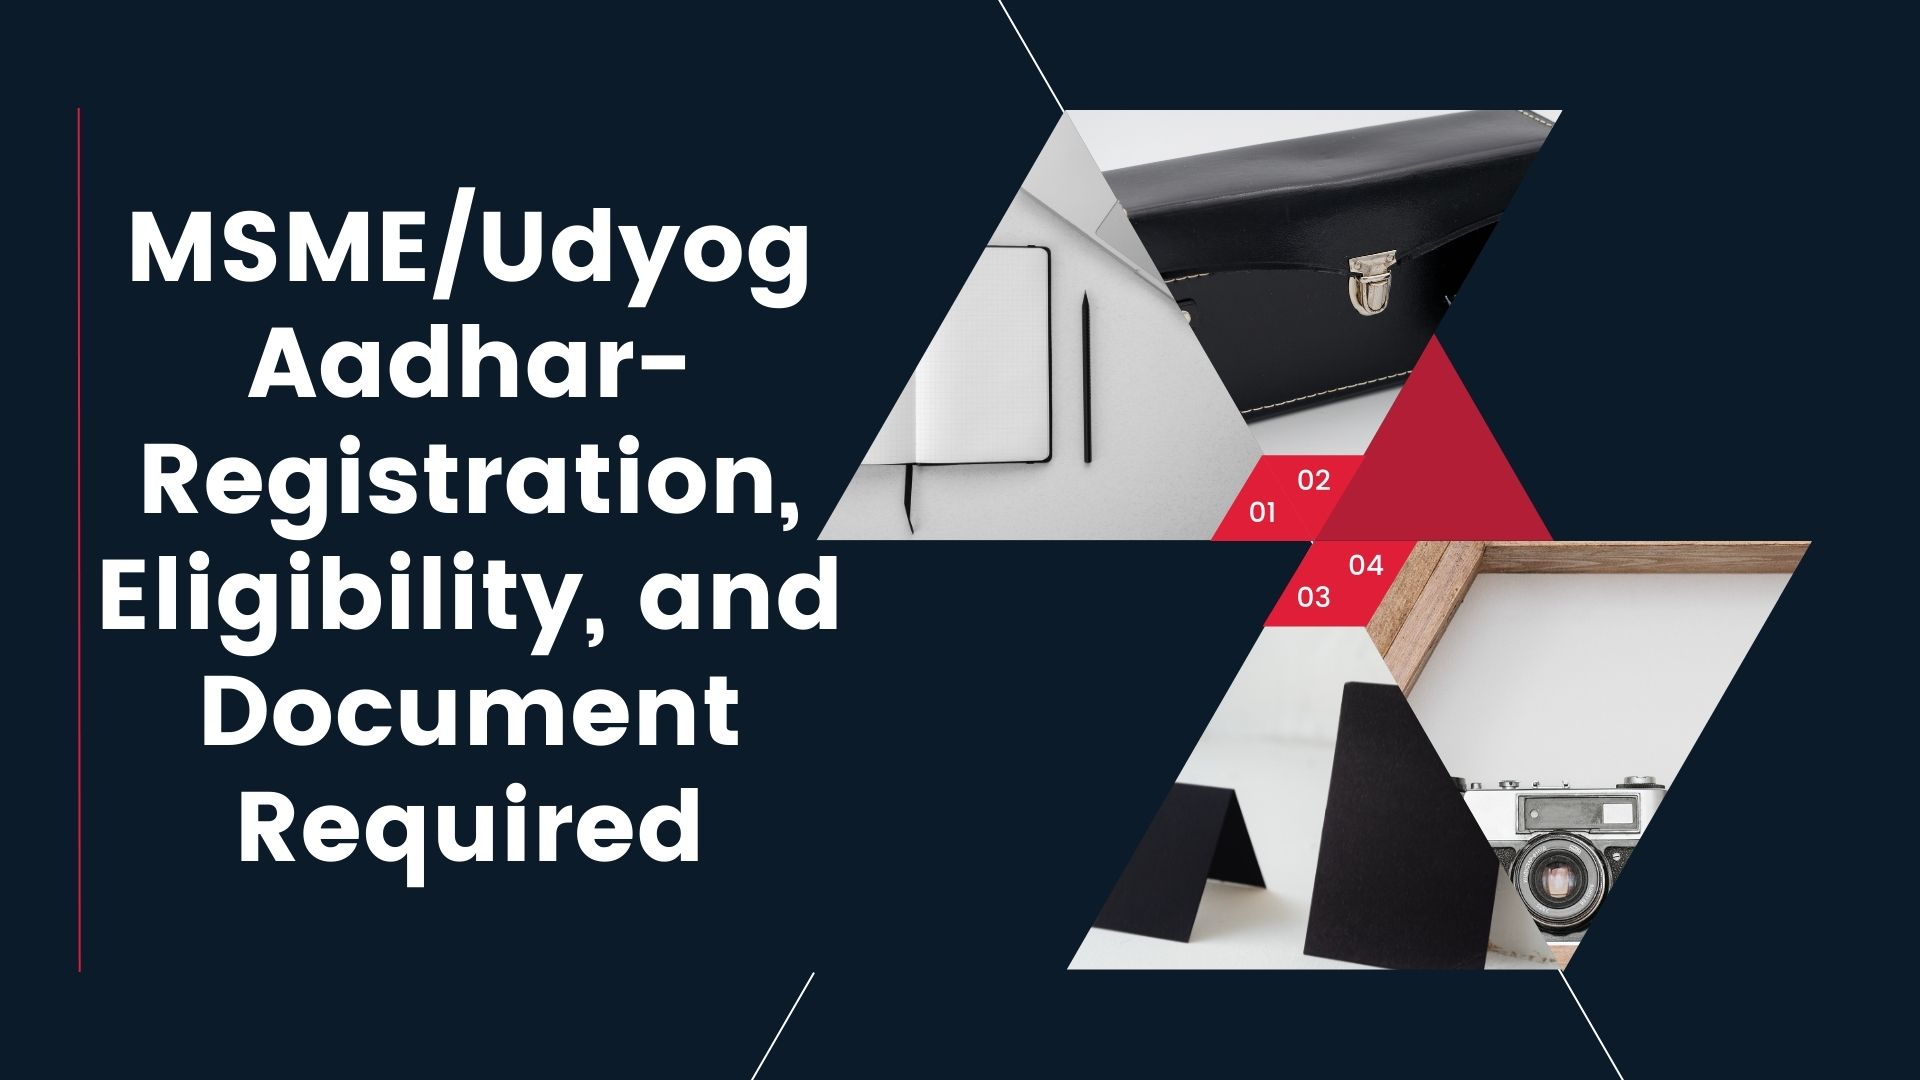 MSME/Udyog Aadhar-Registration, Eligibility, and Document Required